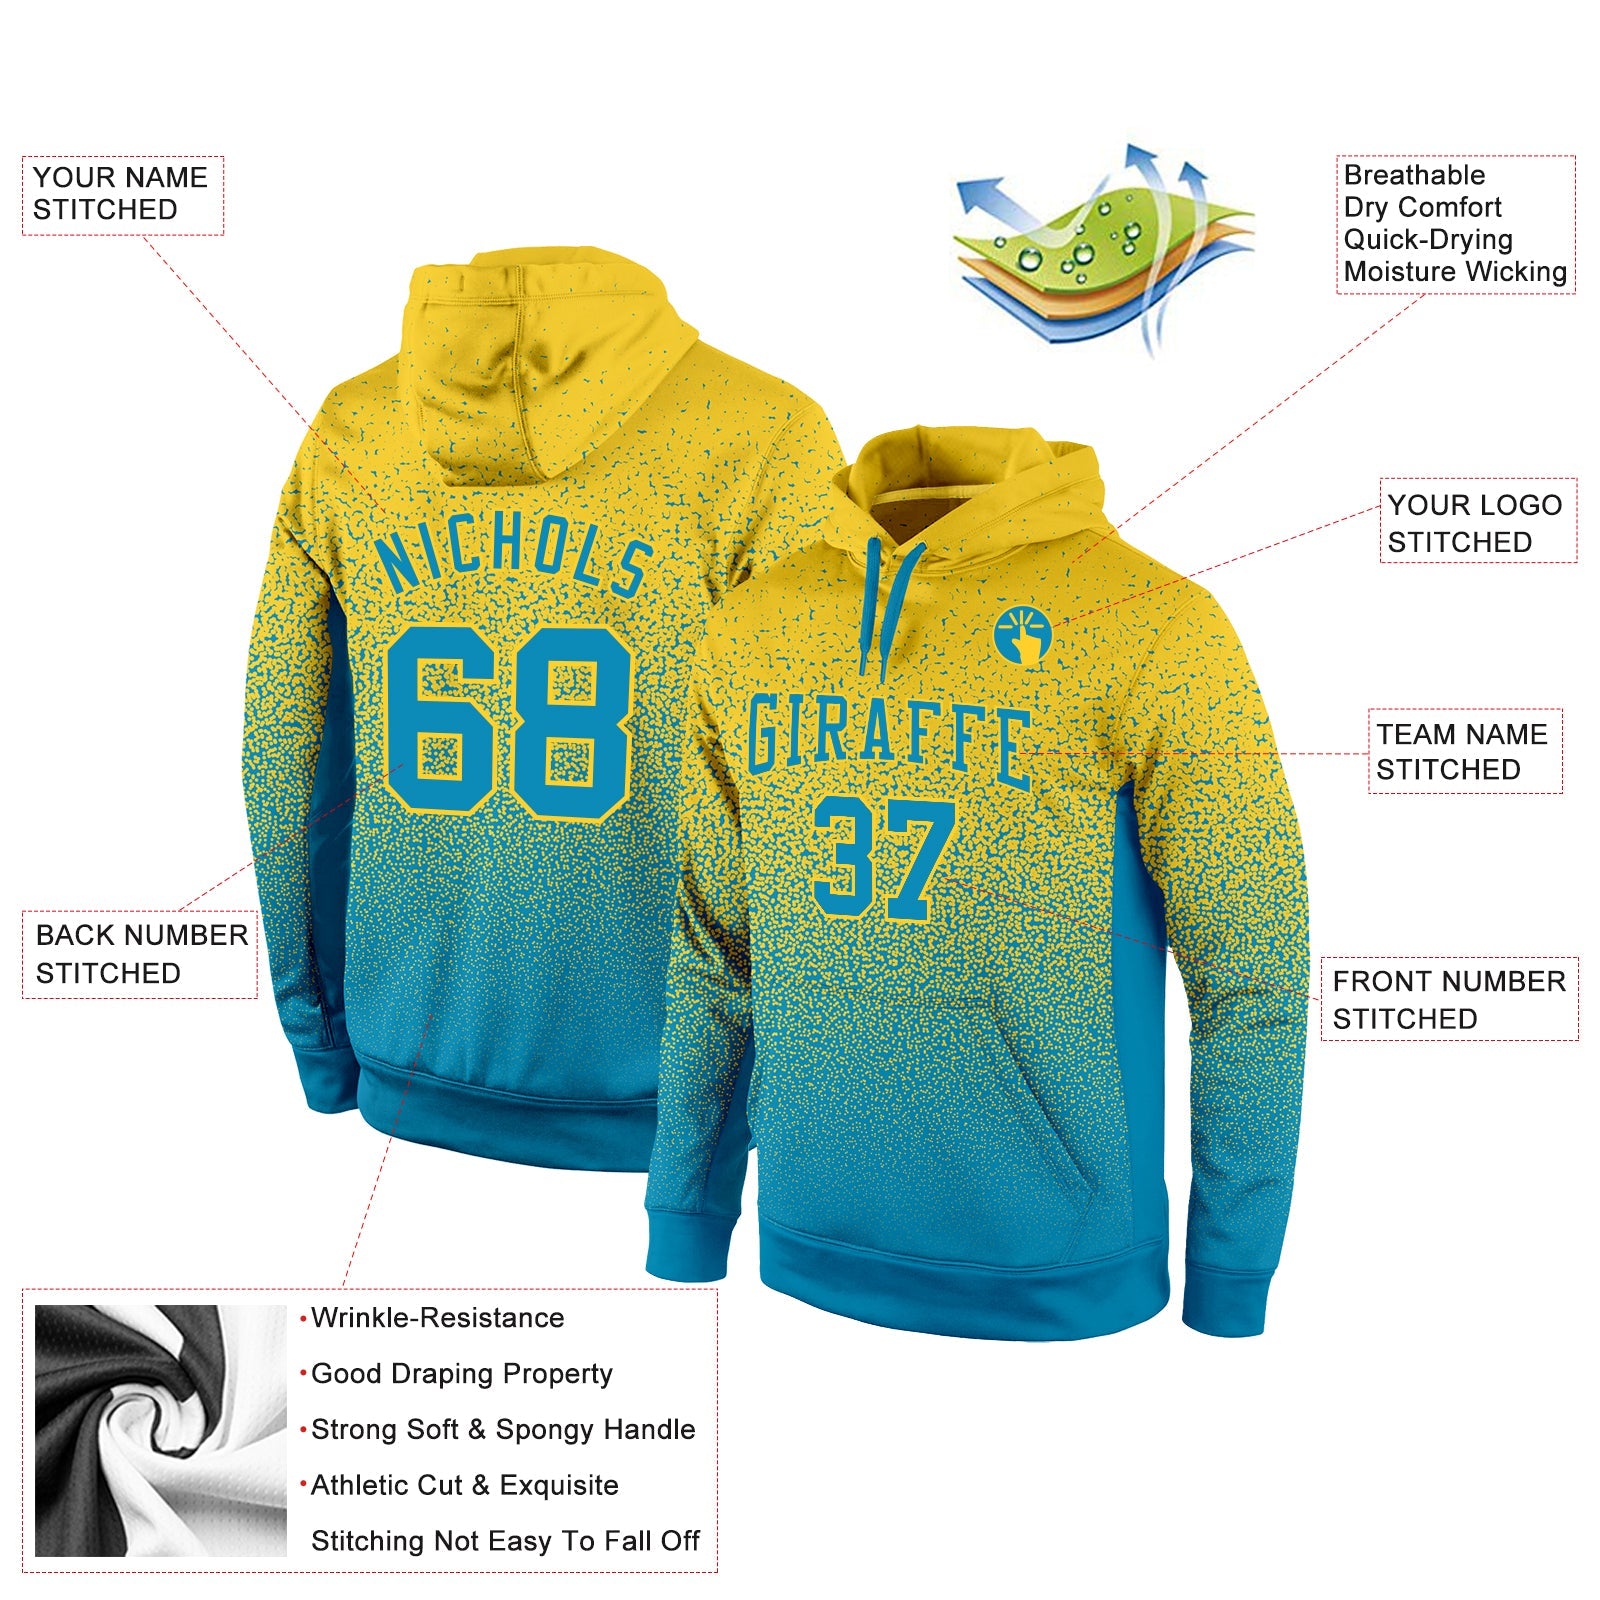 Custom Stitched Gold Panther Blue Fade Fashion Sports Pullover Sweatshirt Hoodie